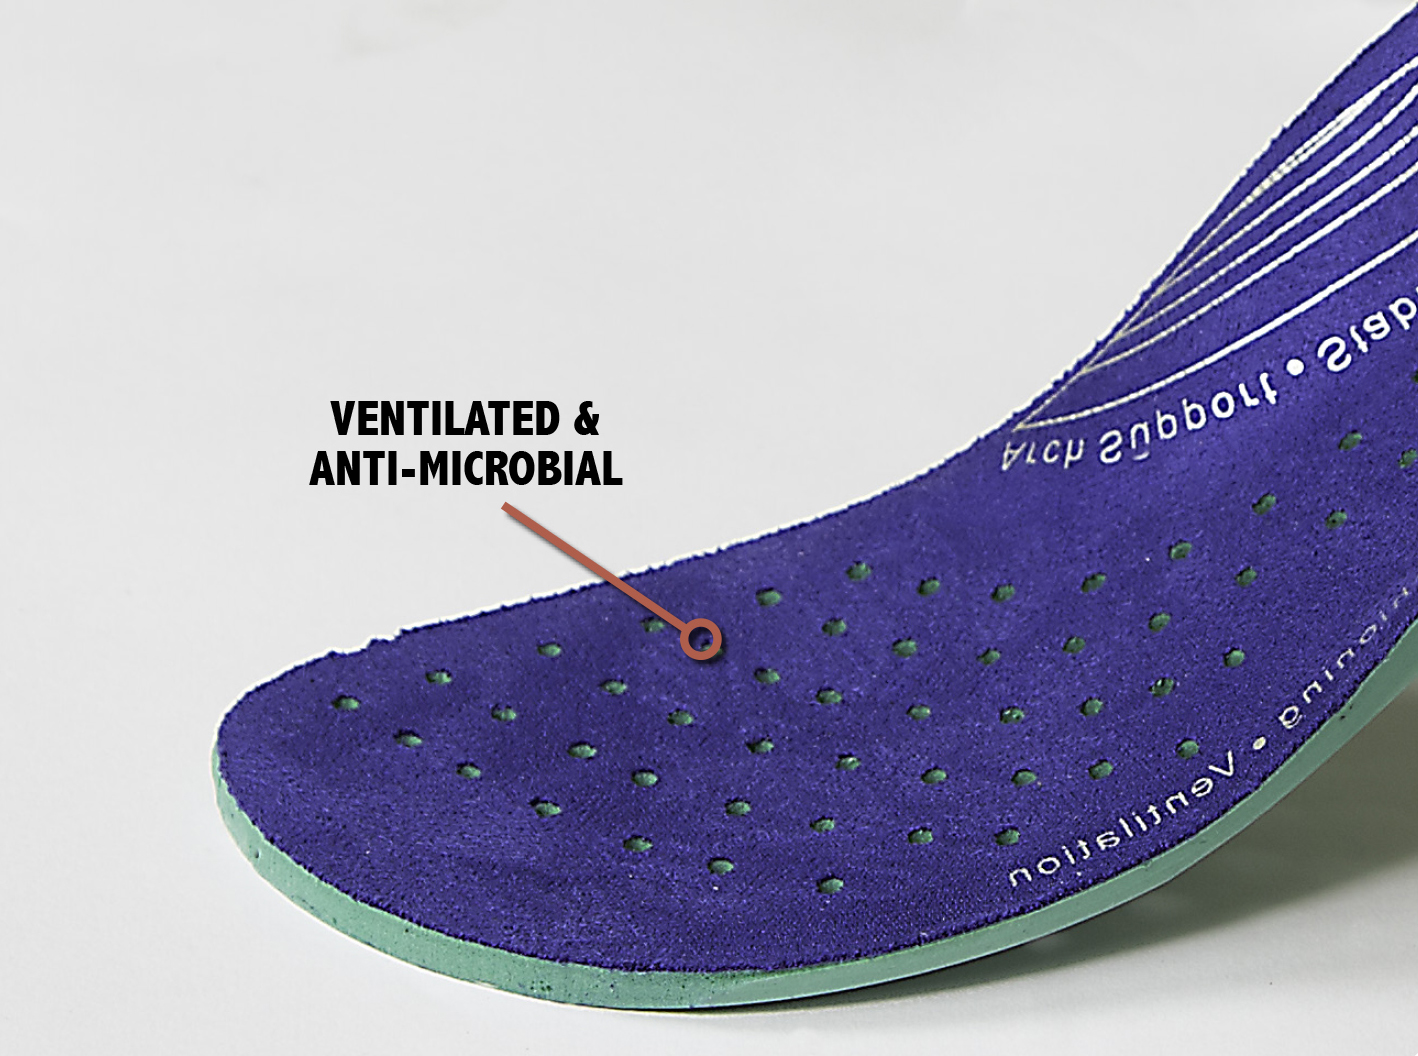 Ventilated and Anti-Microbial